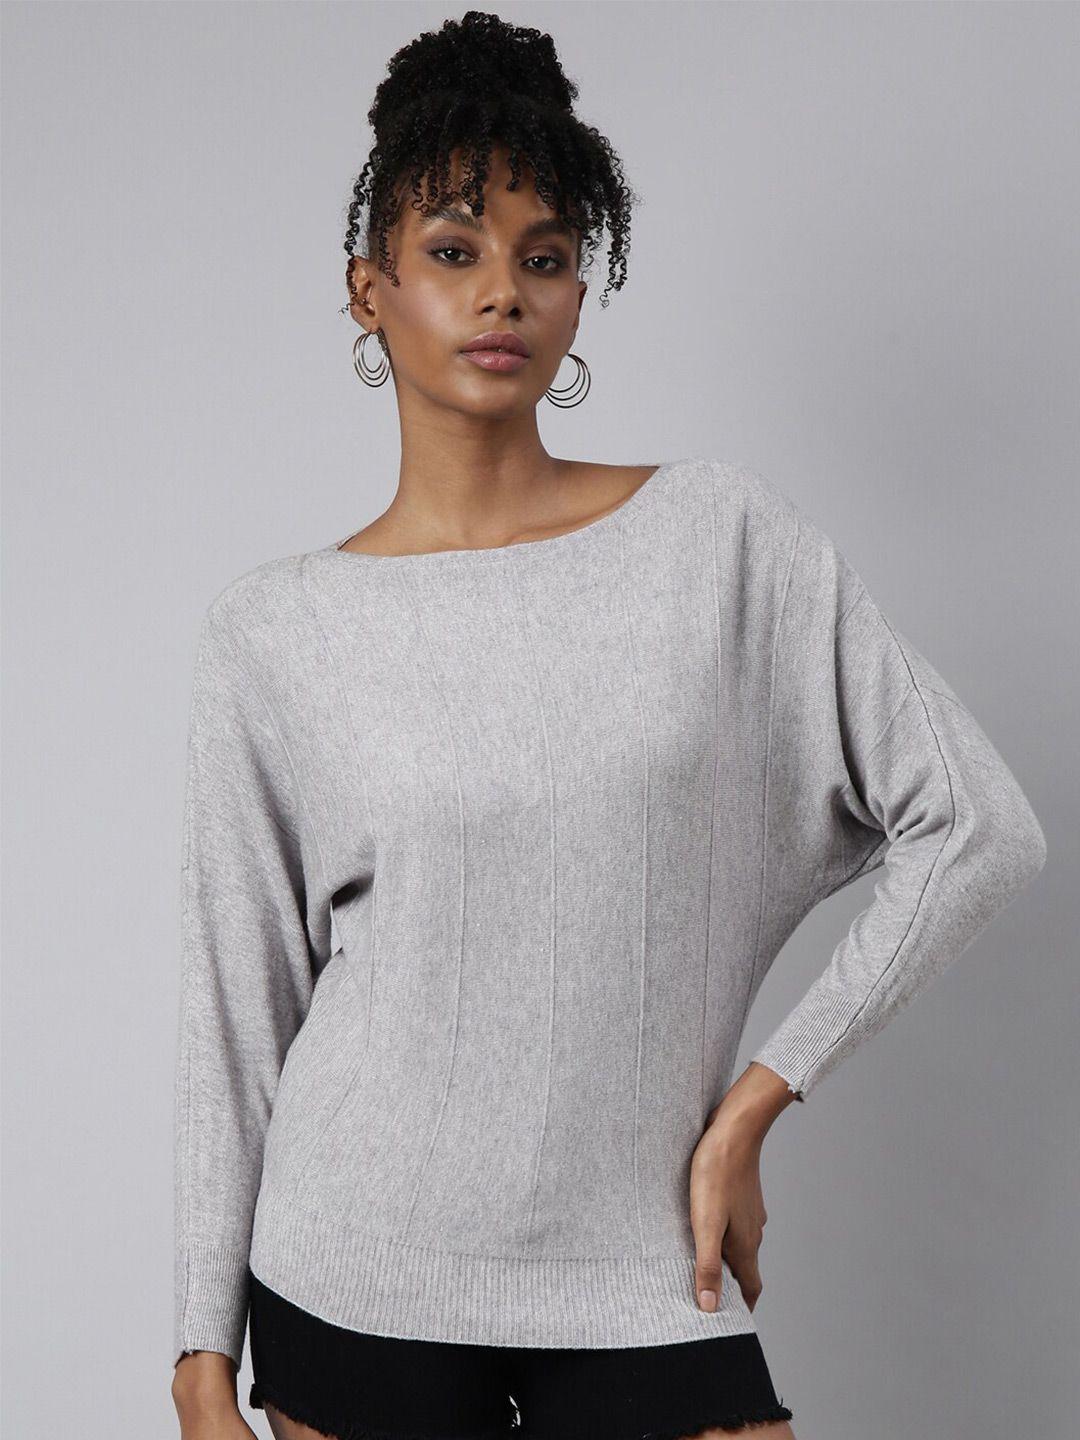 showoff knitted extended sleeves knits top